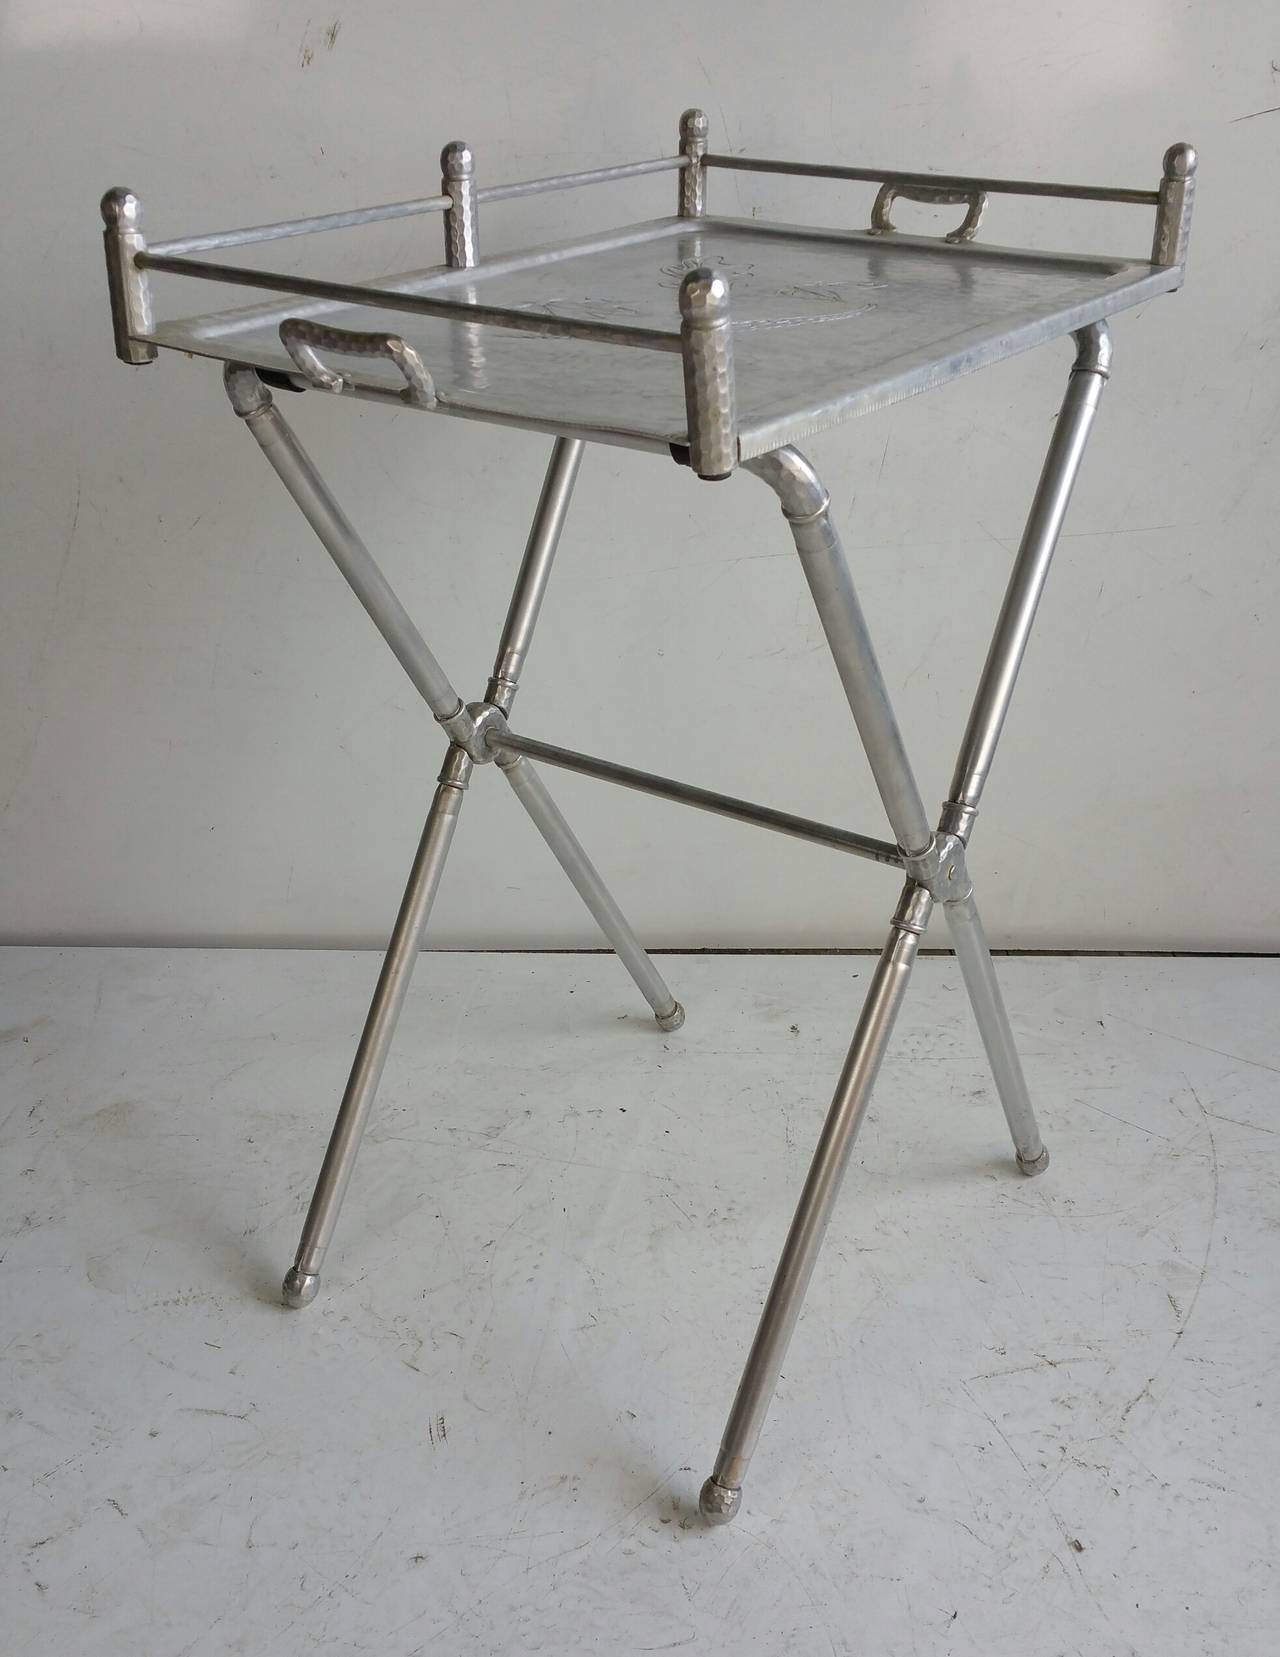 Hand wrought Signed Everlast co ,Polished Aluminum Bar Tray folding table,with acorn leaf engraving circa 1940,,Sleek ,simple .elegant design.

Measurements to tray height 30